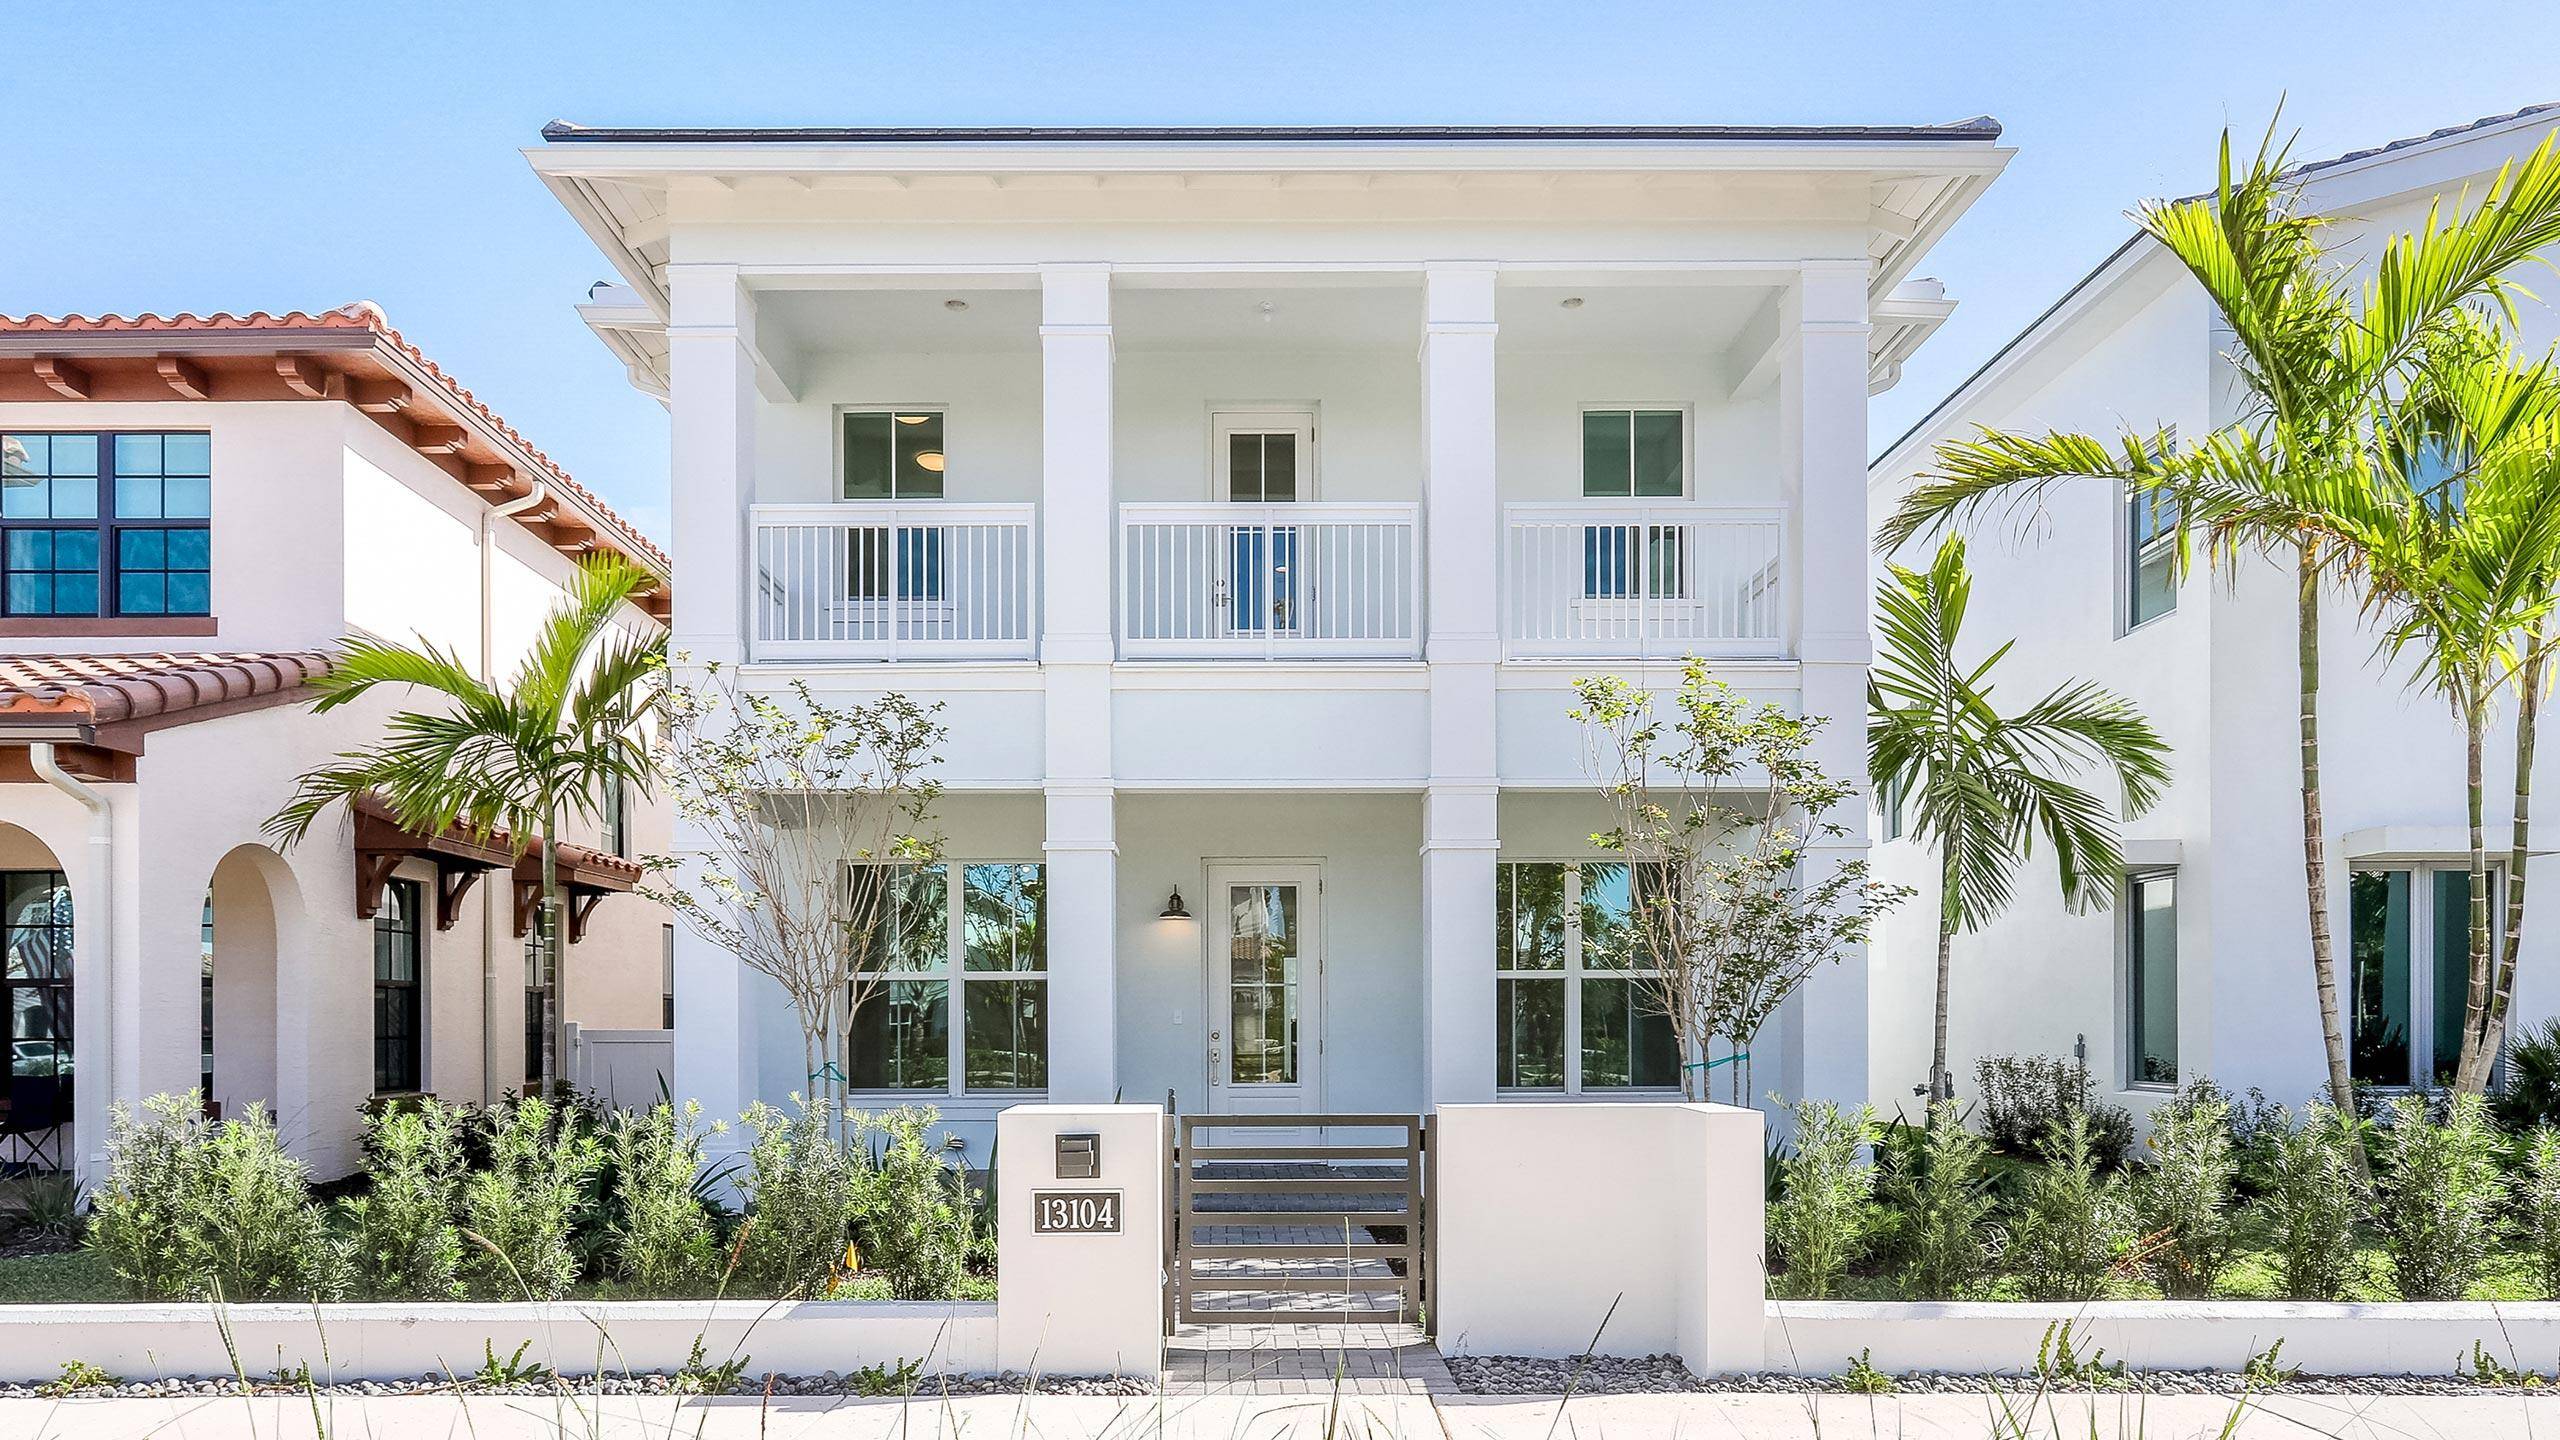 MOVE IN READY. Introducing a brand new luxury residence in the prestigious Alton community by Kolter Homes, located in the highly sought after area of Palm Beach Gardens, Florida.